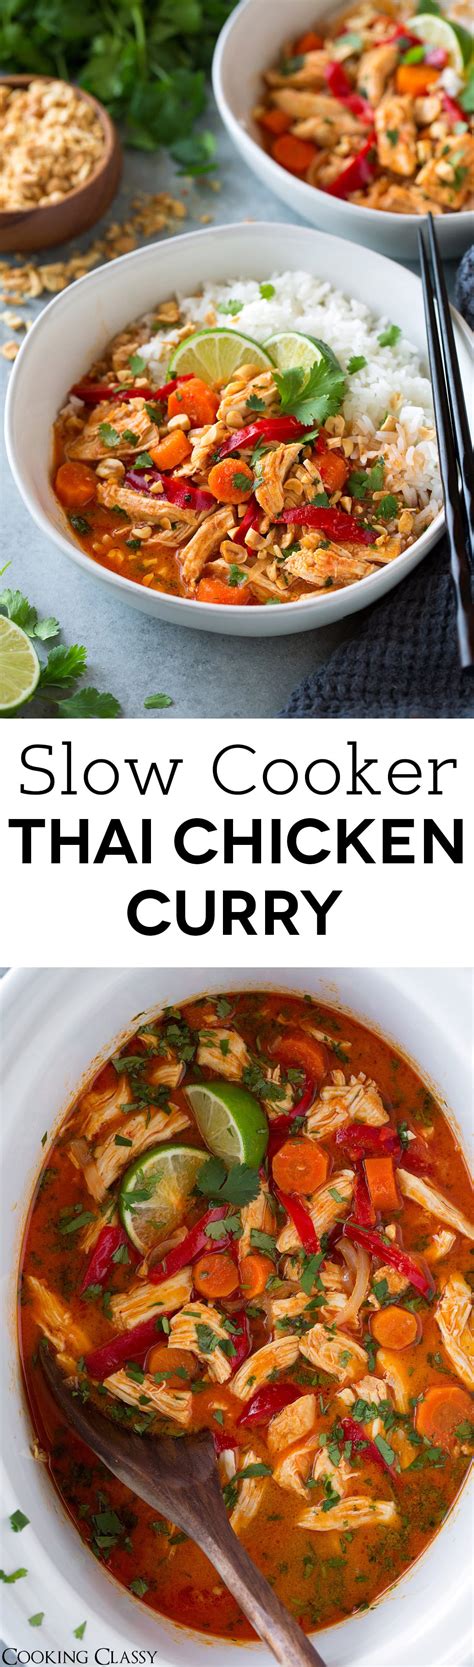 thai-chicken-curry-slow-cooker-or-instant-pot image